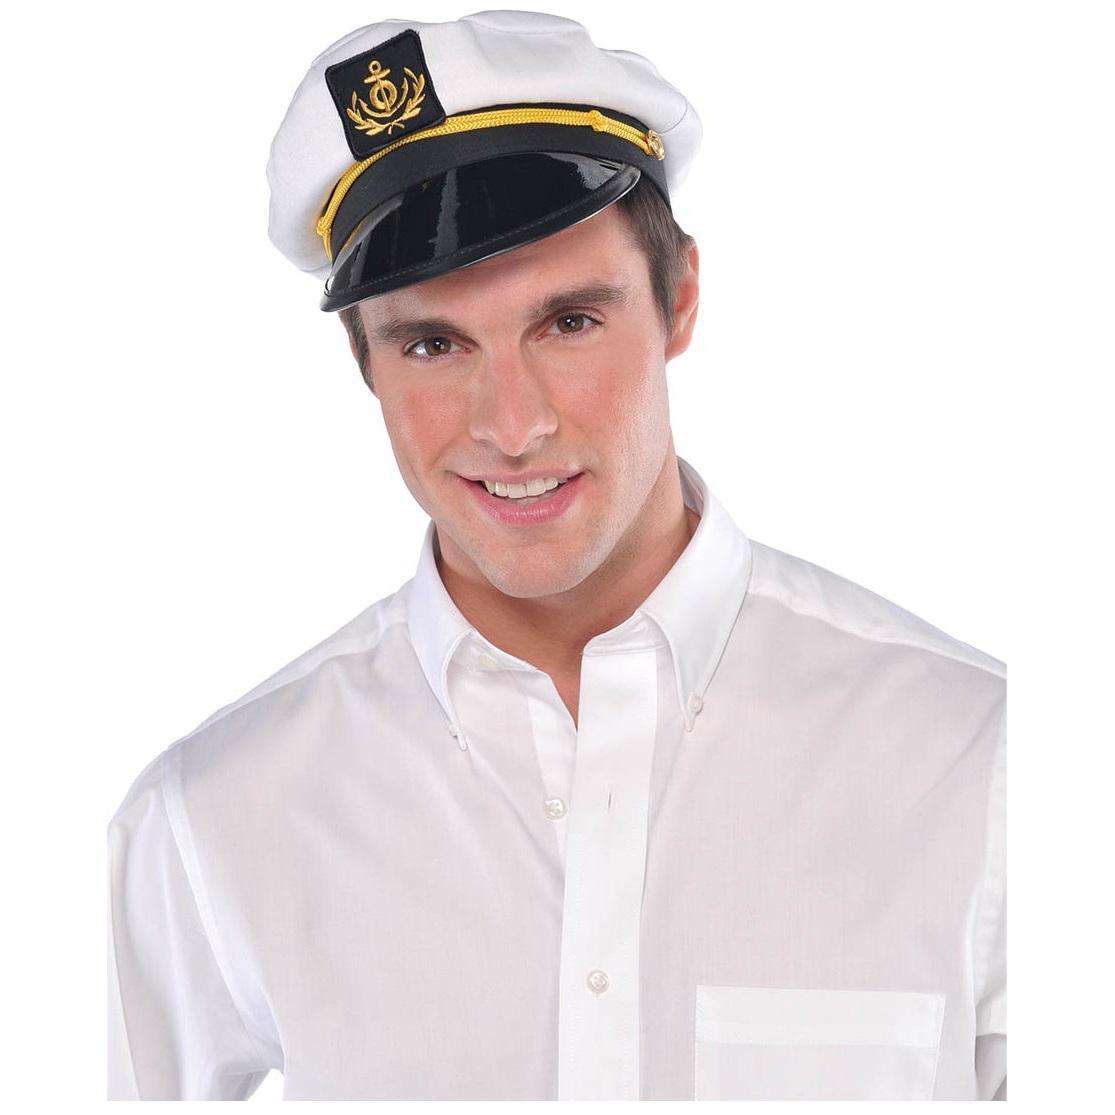 Skipper Hat Costumes & Apparel - Party Centre - Party Centre